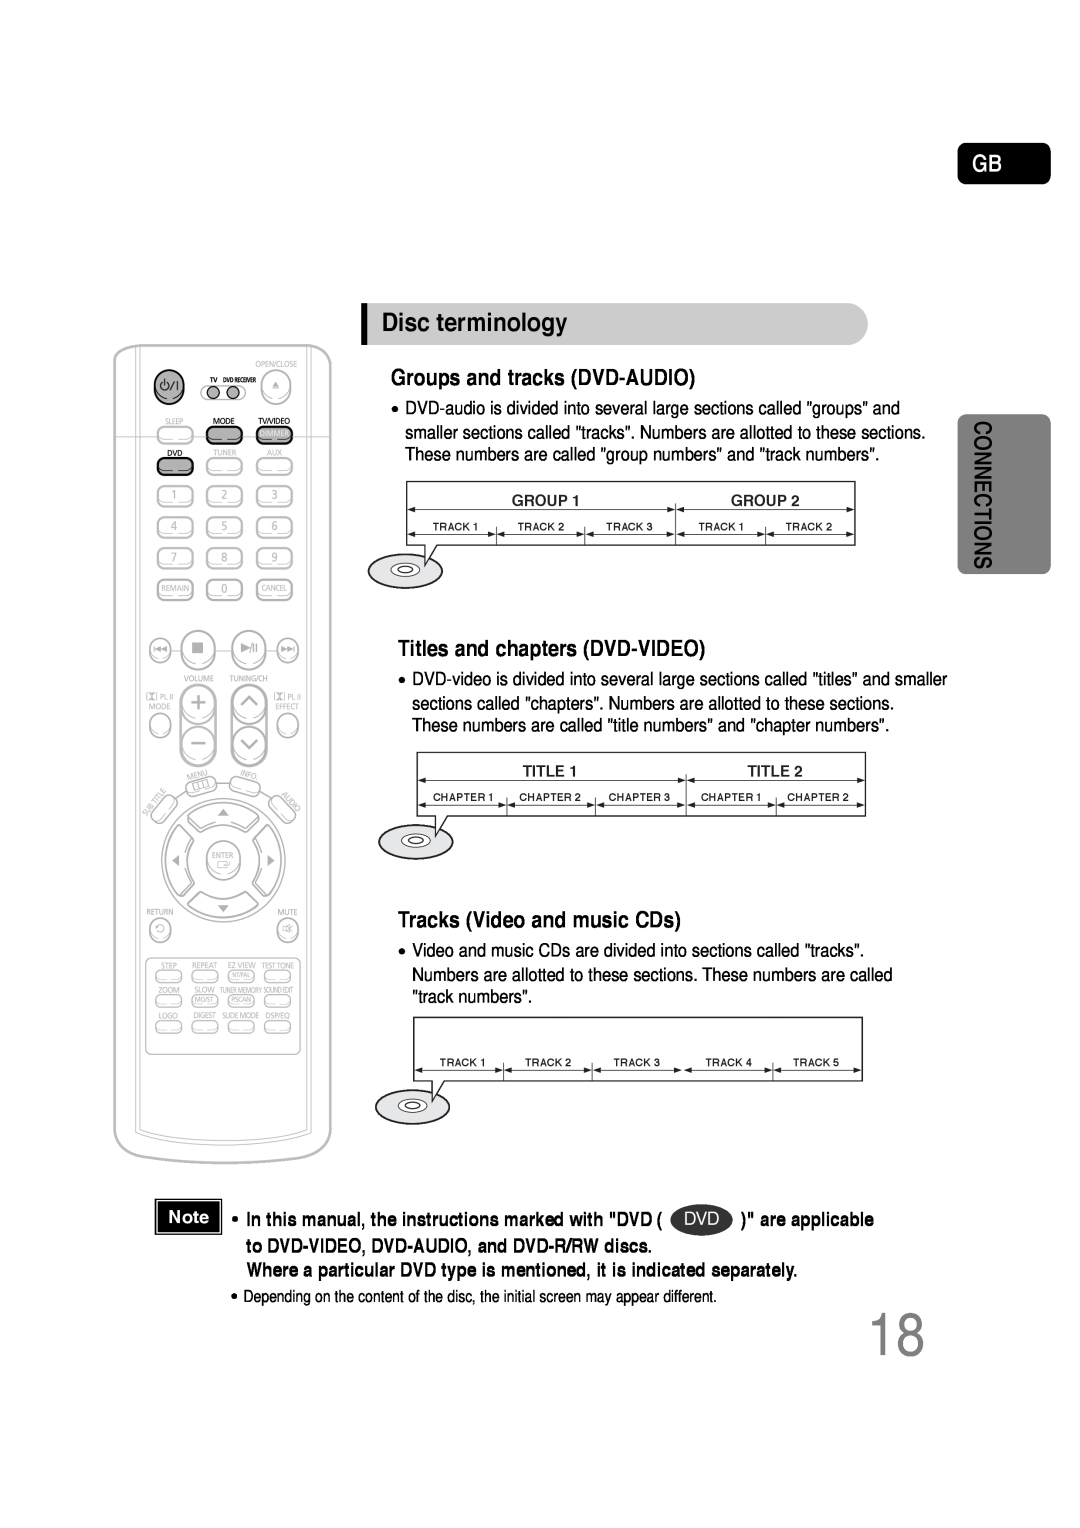 Samsung HT-P30 instruction manual Disc terminology, to DVD-VIDEO, DVD-AUDIO,and DVD-R/RWdiscs, are applicable, Group, Title 